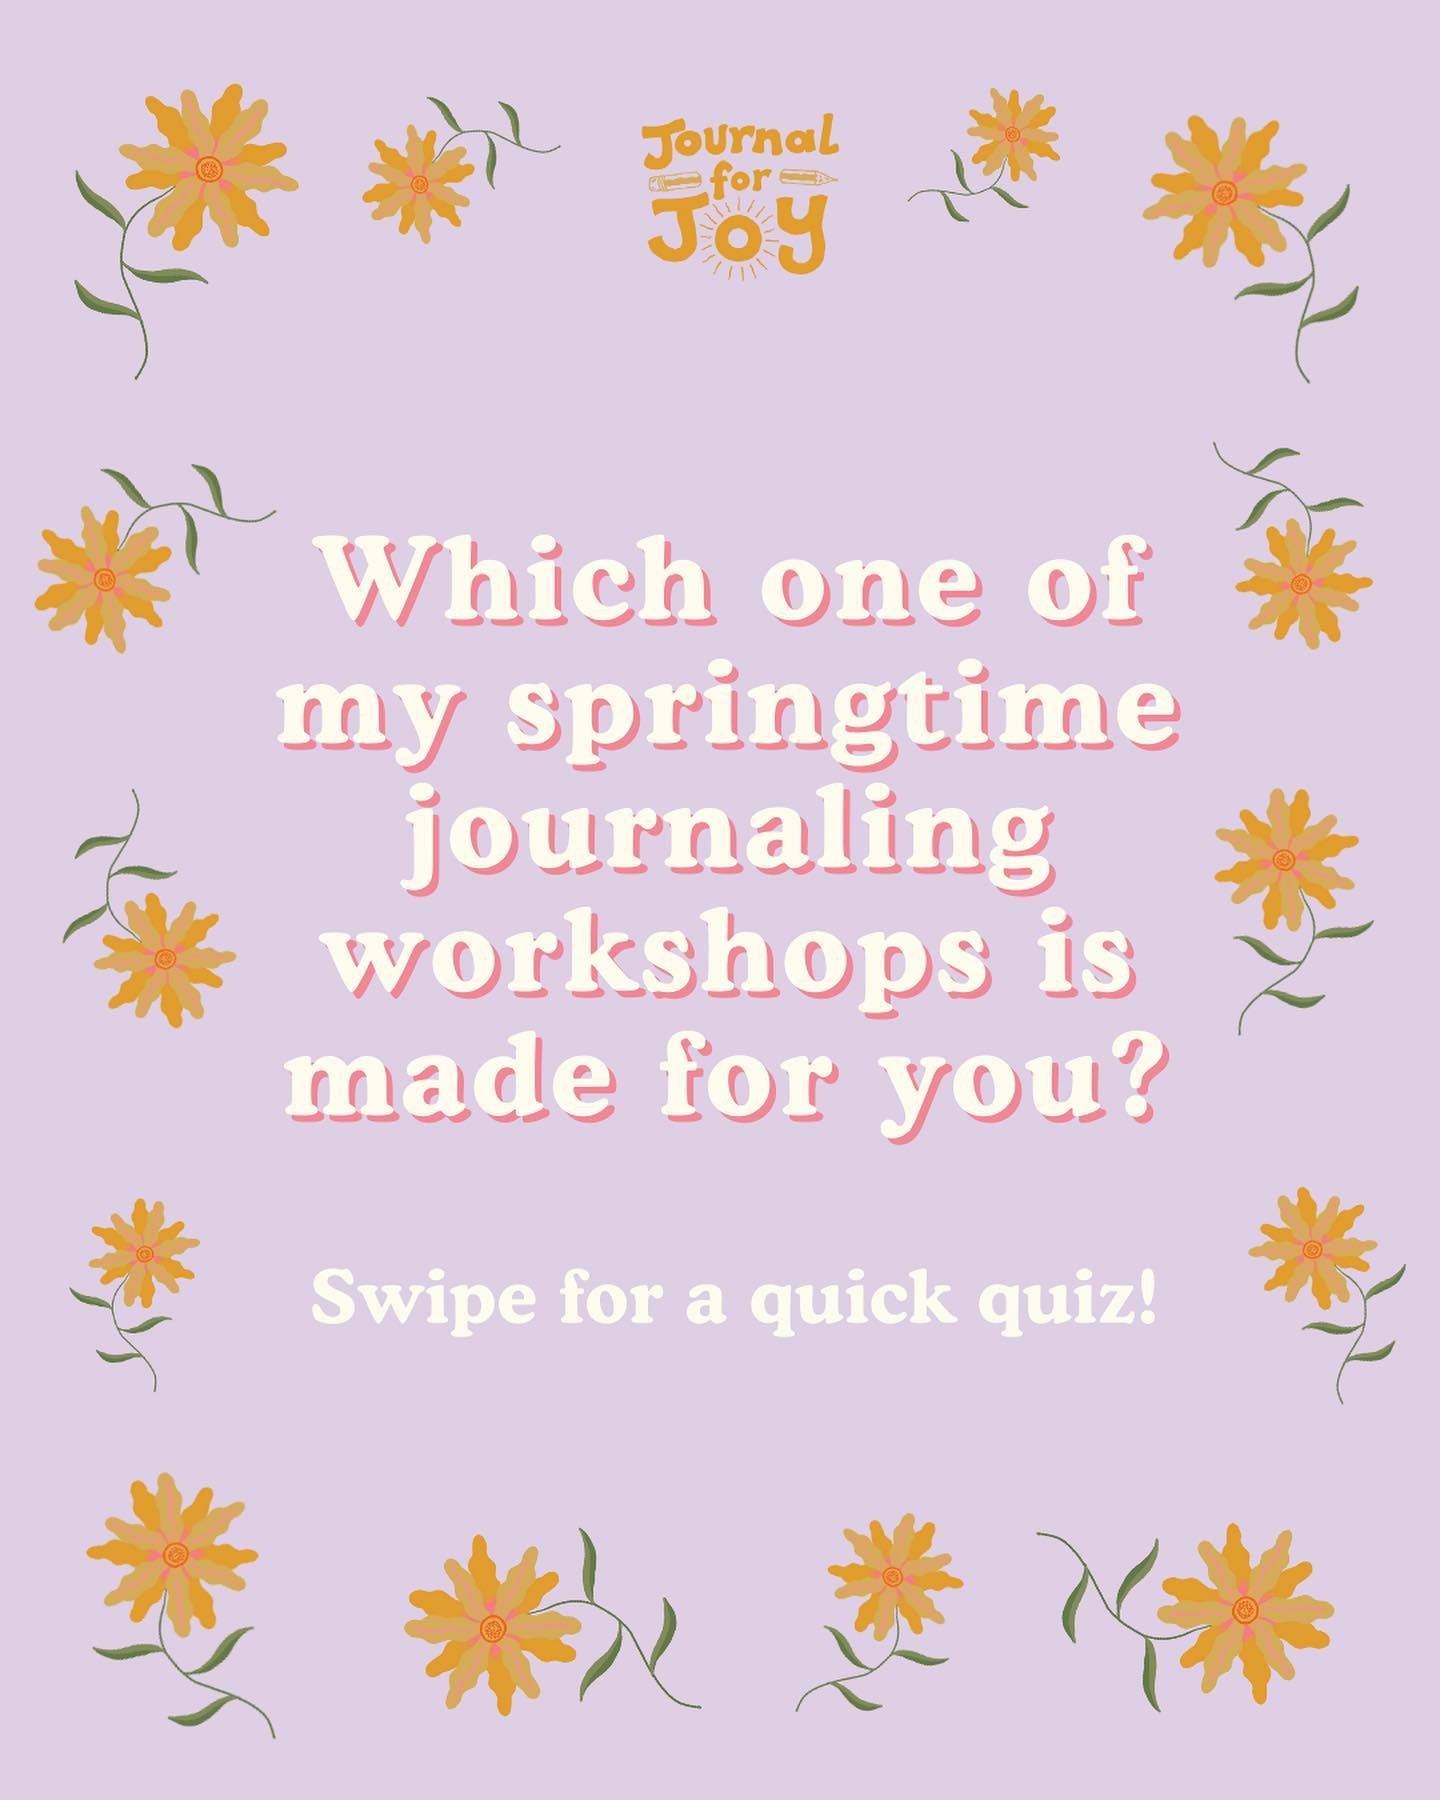 I used to love doing quizzes like this in magazines when I was a kid (anyone remember Mizz and J17? 🙃)...so I thought I&rsquo;d create one for you in the lead up to my new journaling workshops! Let me know what you get in the comments 🤓🌸

P.S. The